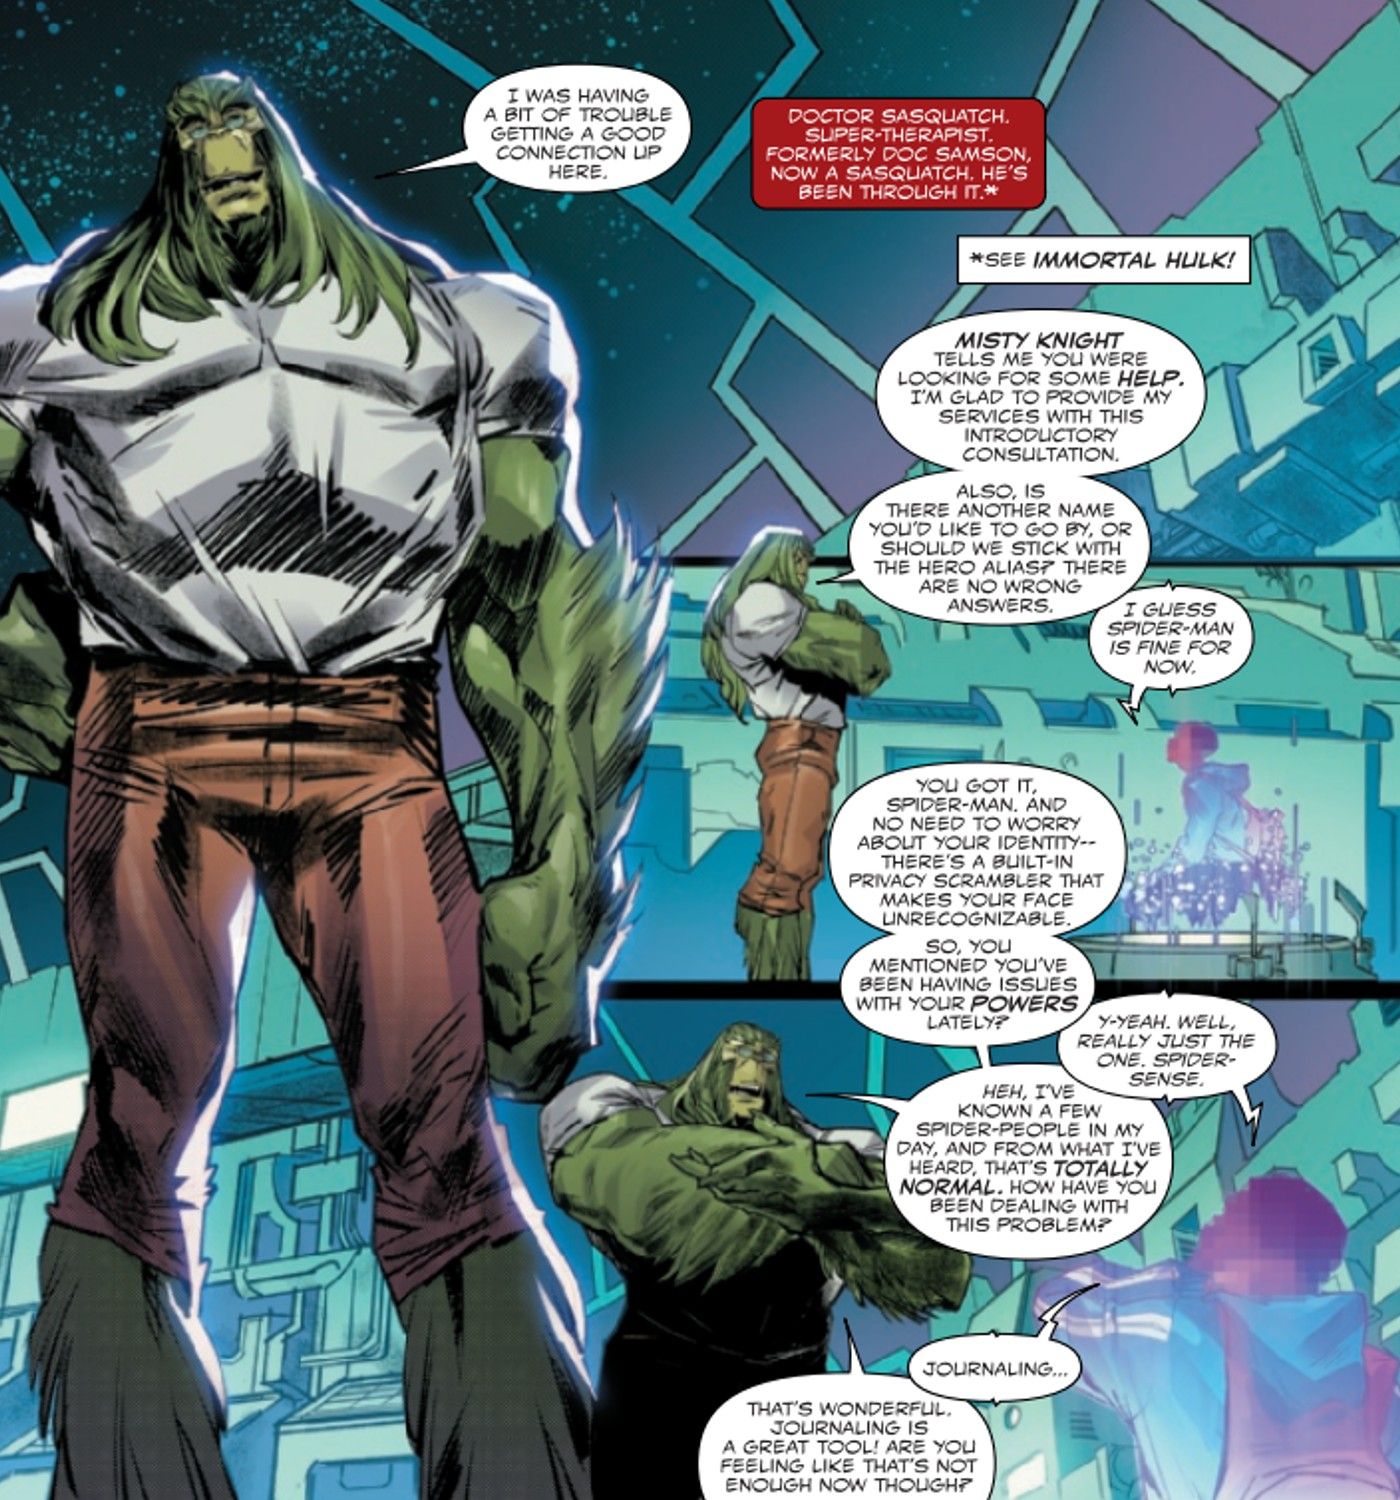 Doc Samson aka Dr. Sasquatch has a therapy session with Miles Morales Spider-Man